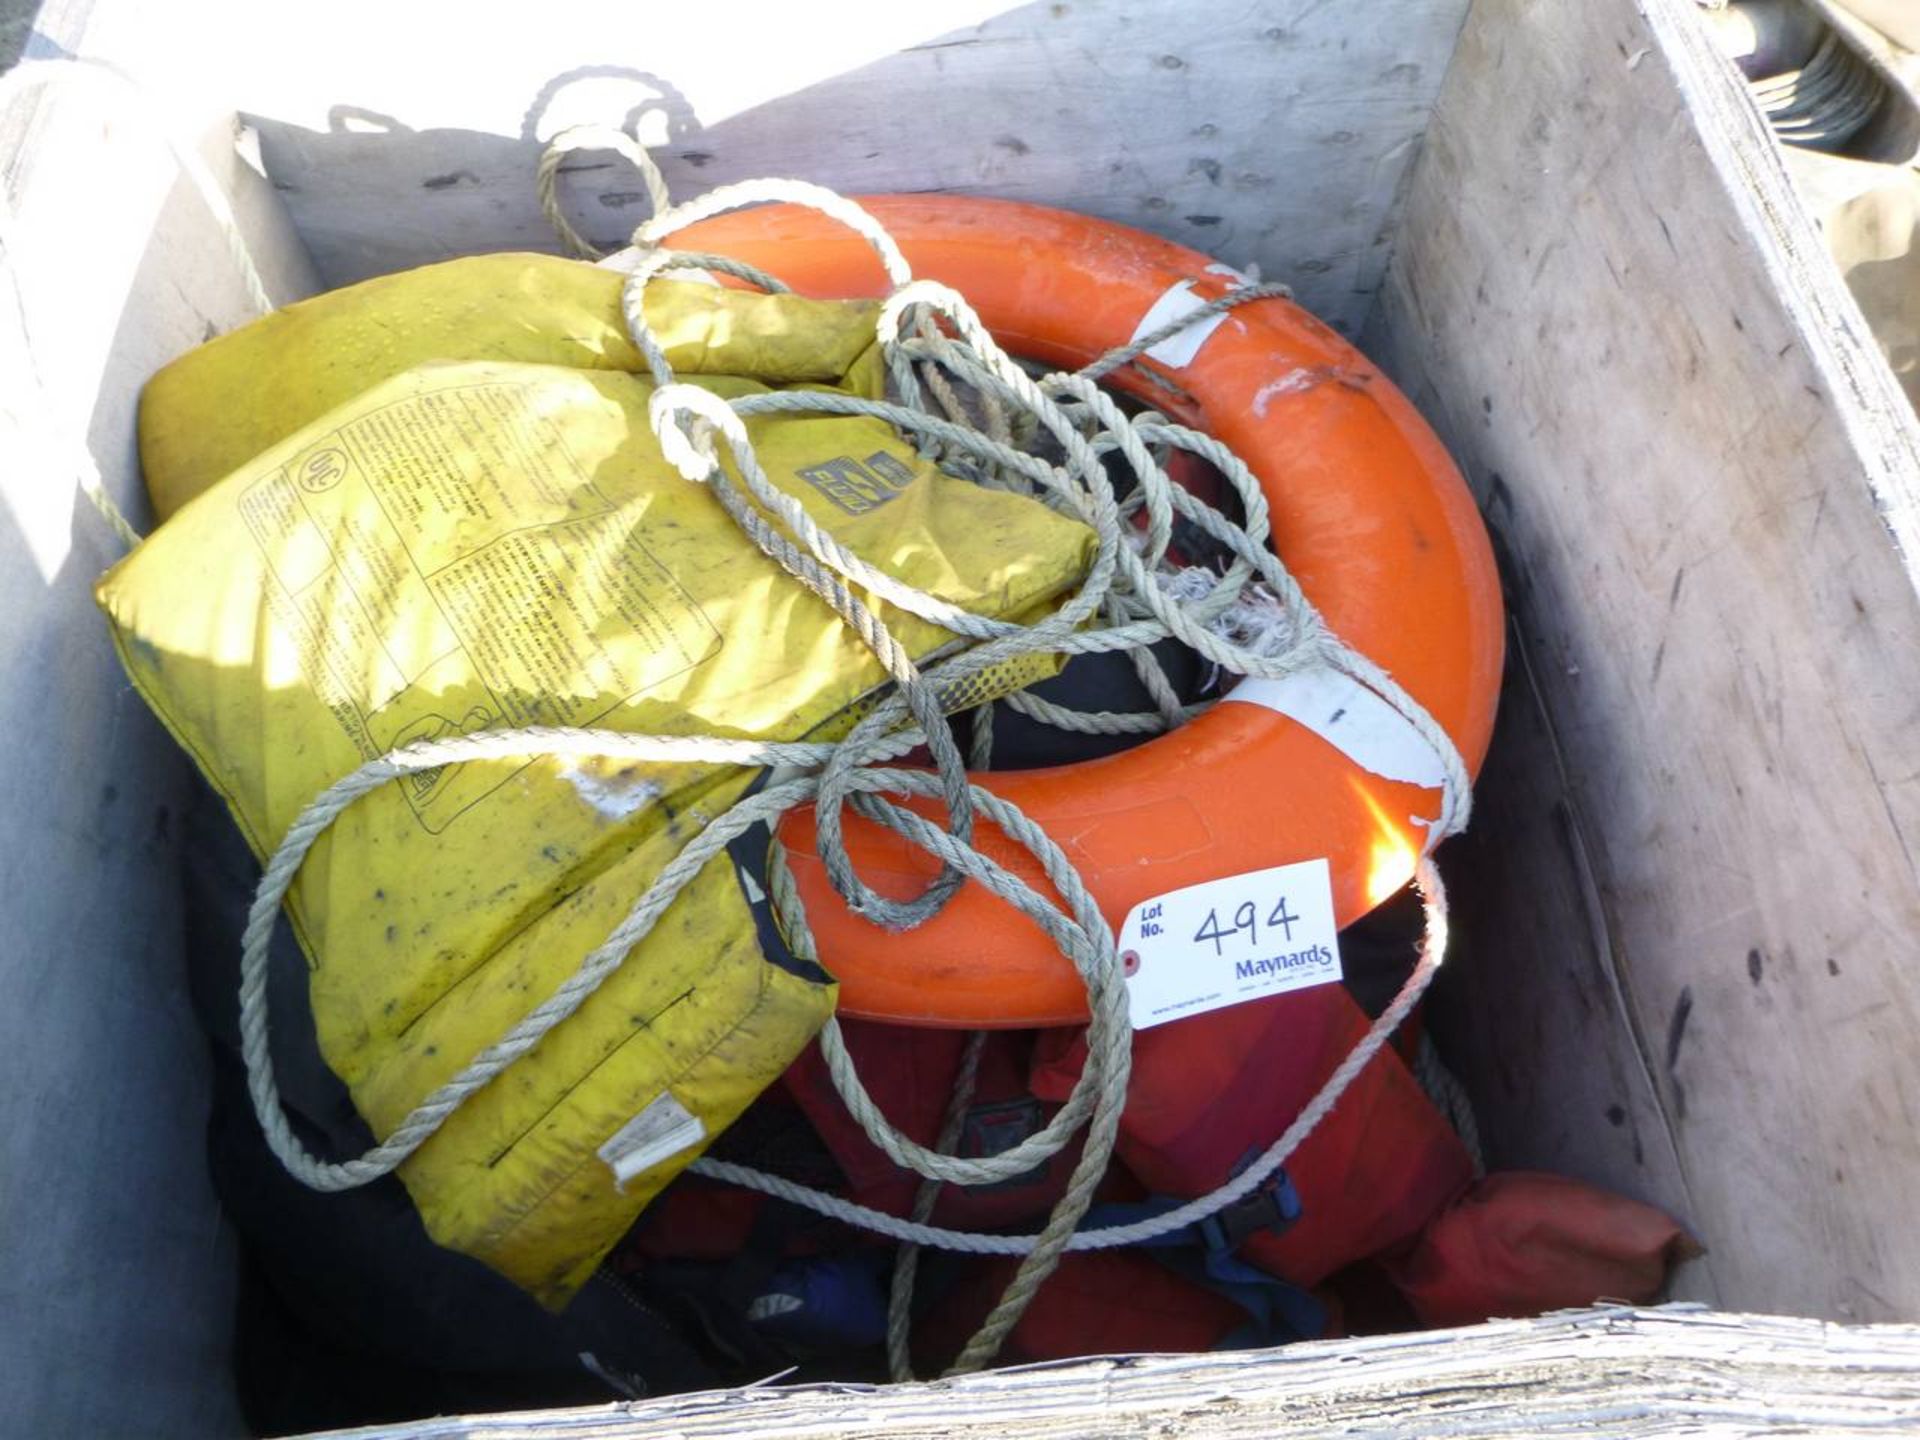 Lot of safety floats and safety rings